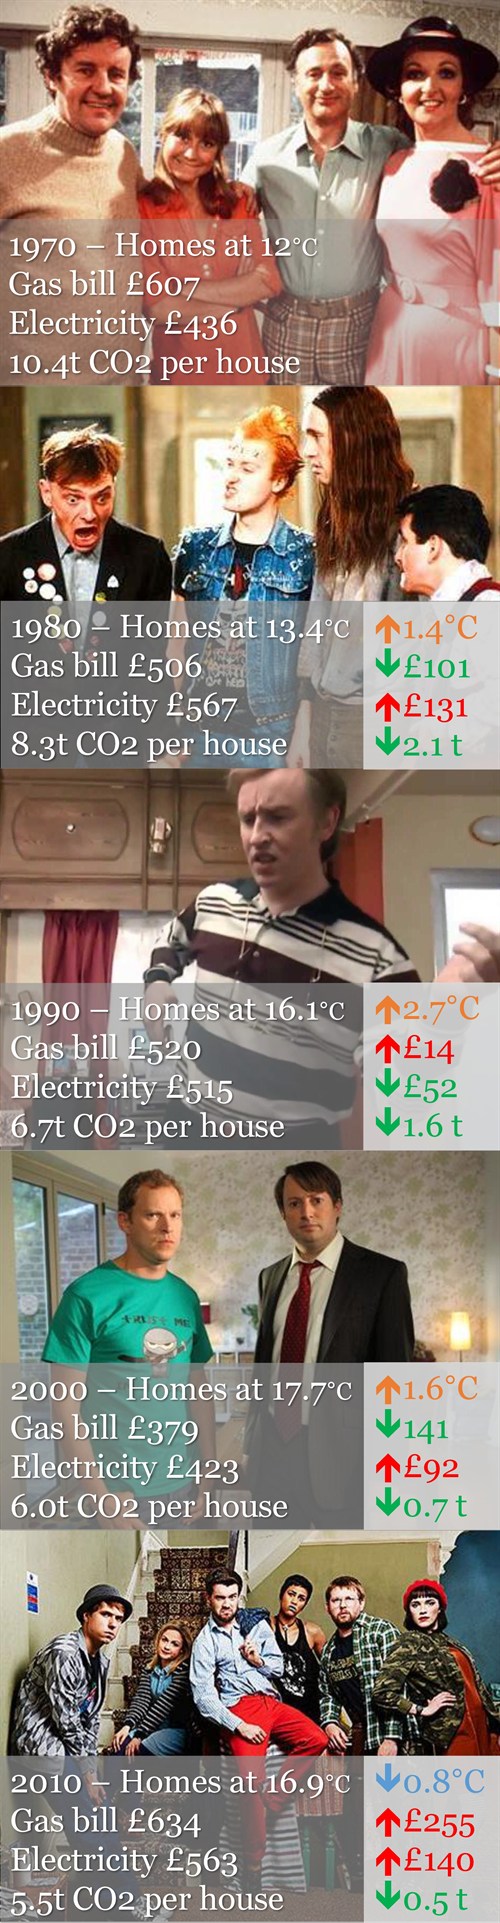 home_energy_use_carbon_brief